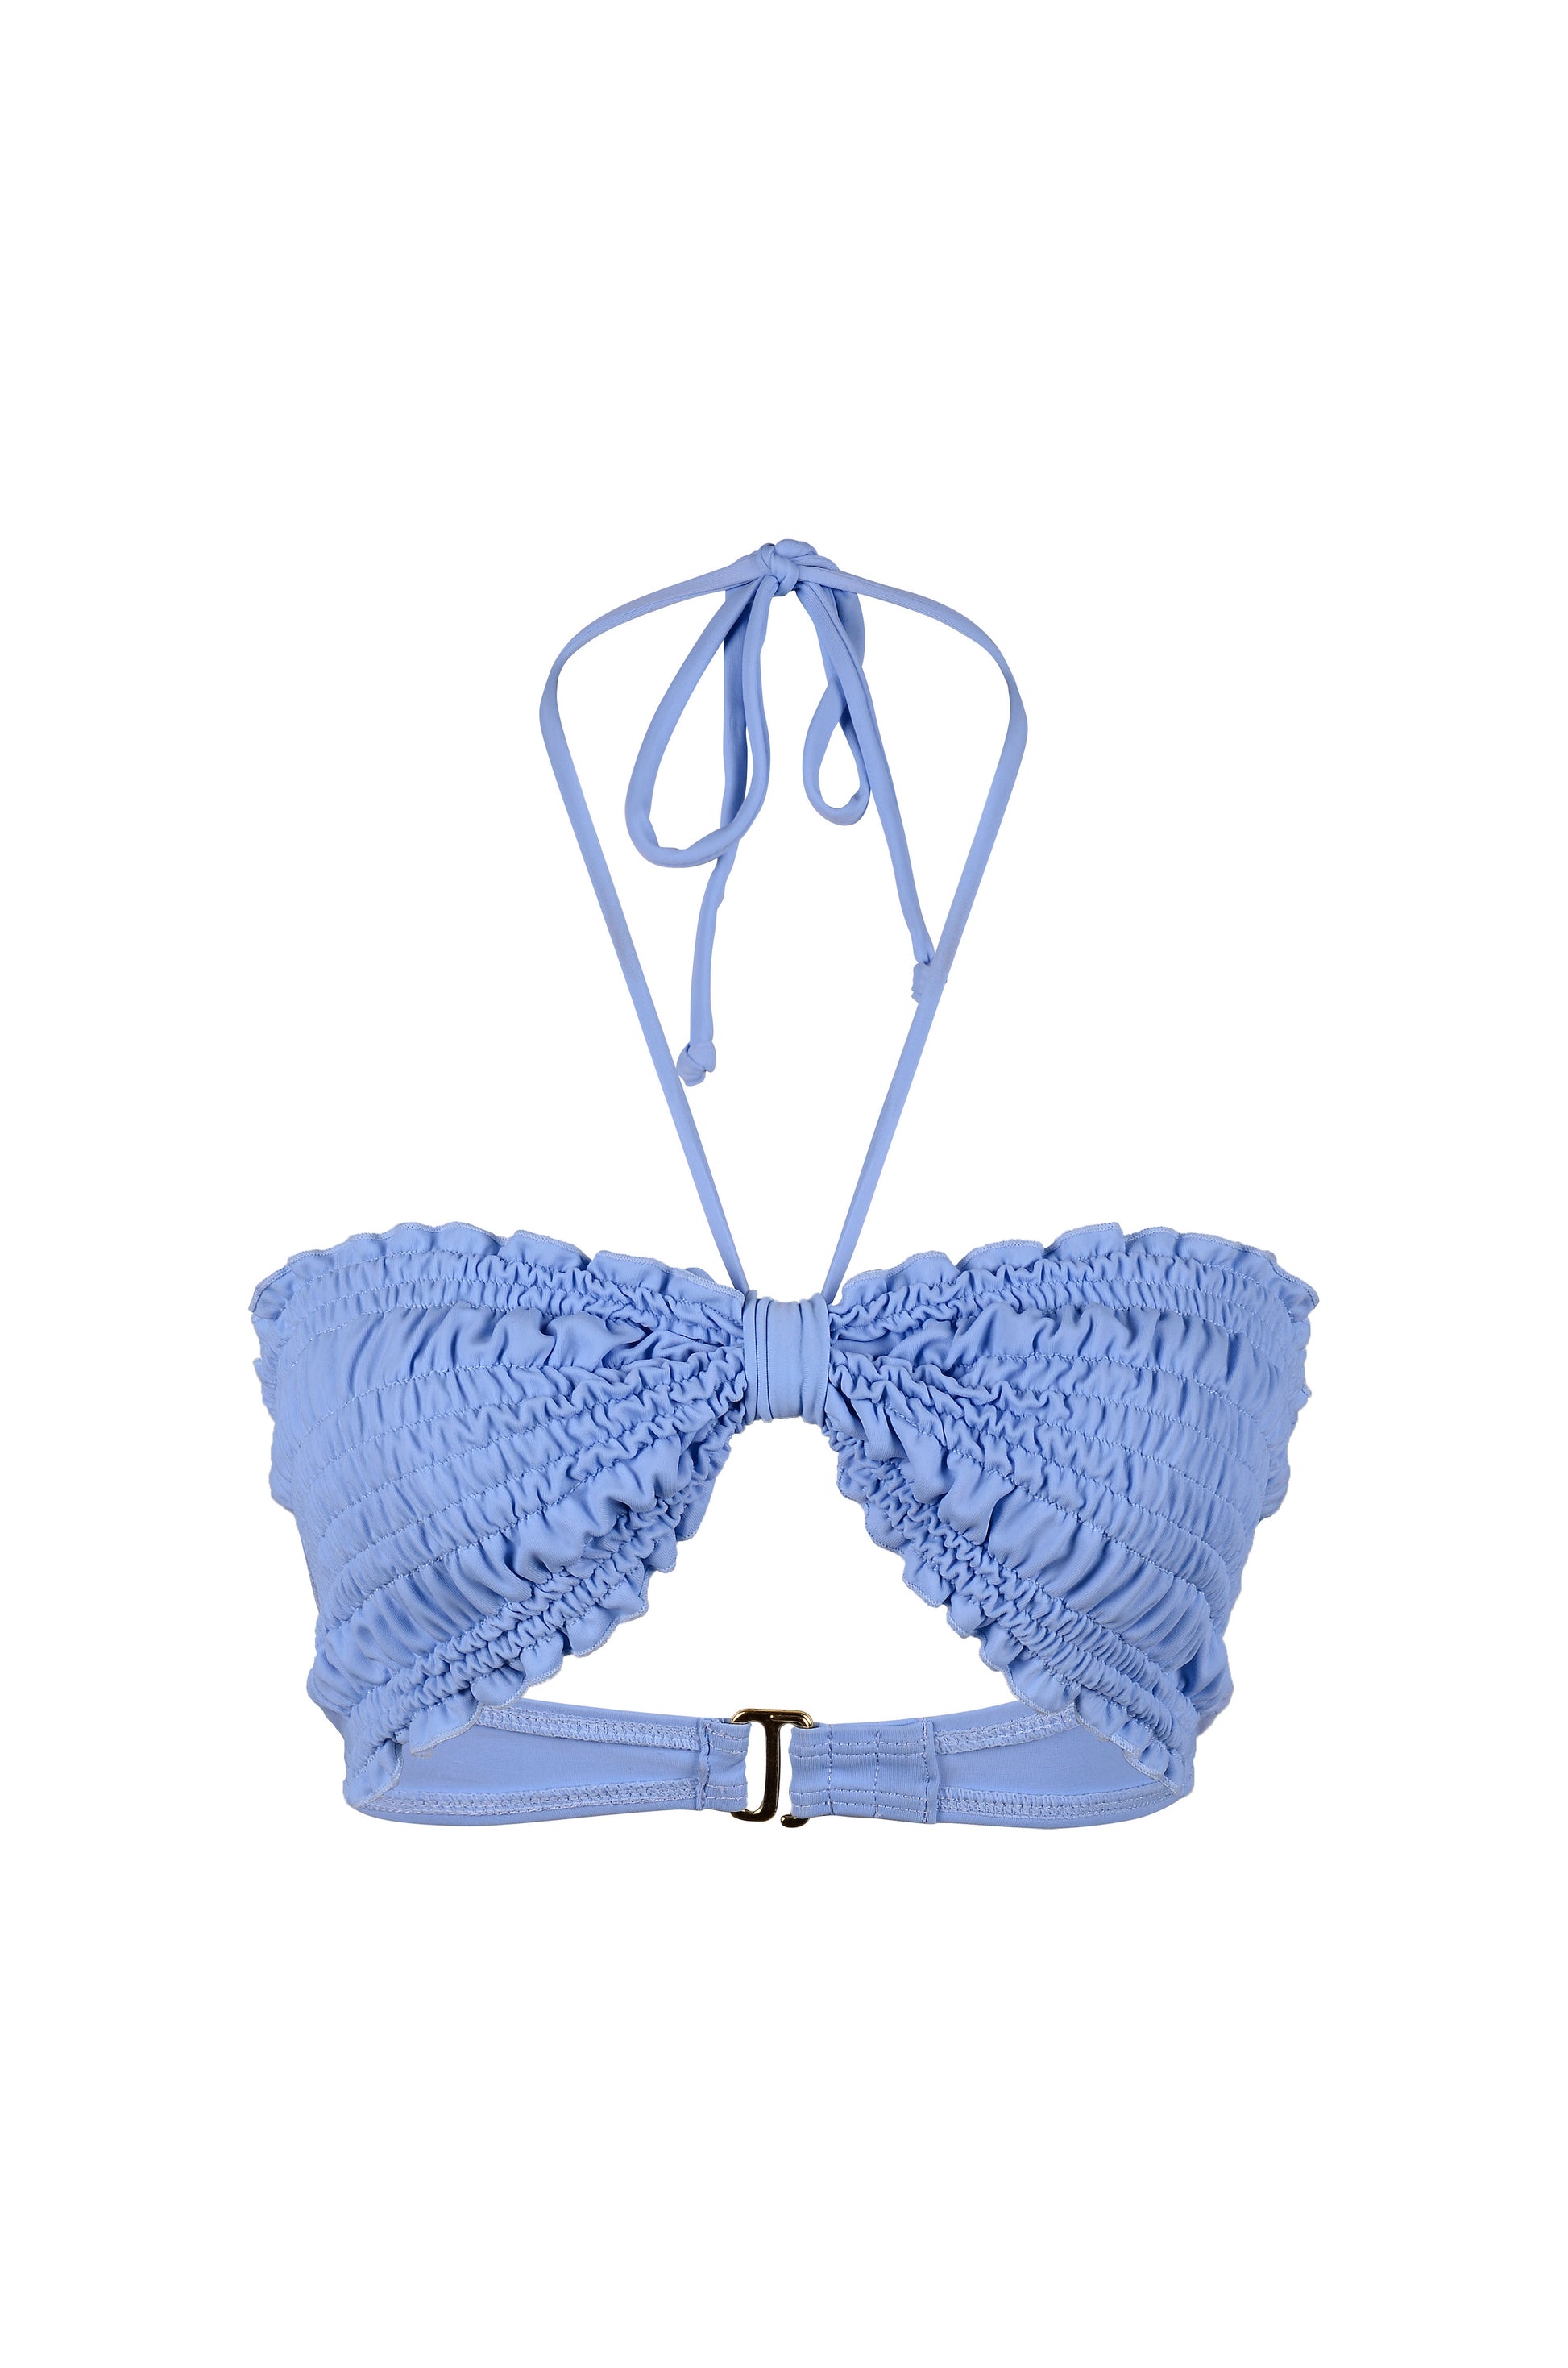 ZIEMIA TOP (SKY BLUE) - Swimwear THIS IS A LOVE SONG